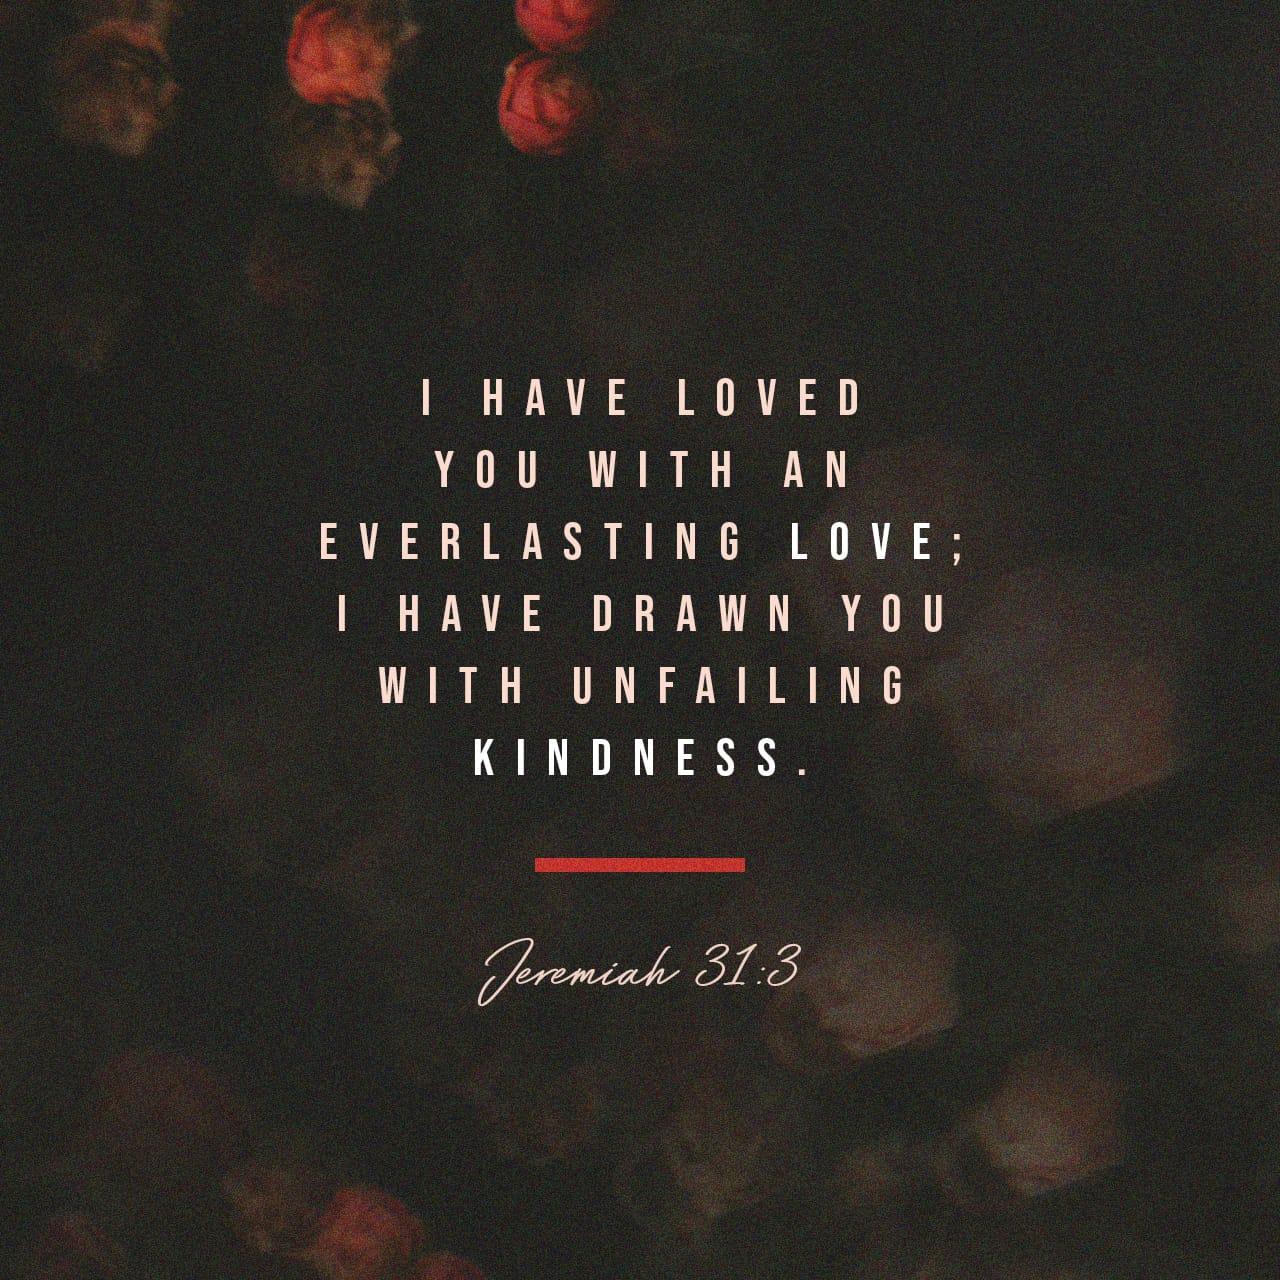 Bible Verse of the Day - day 92 - image 36058 (Jeremiah 31:1-19)